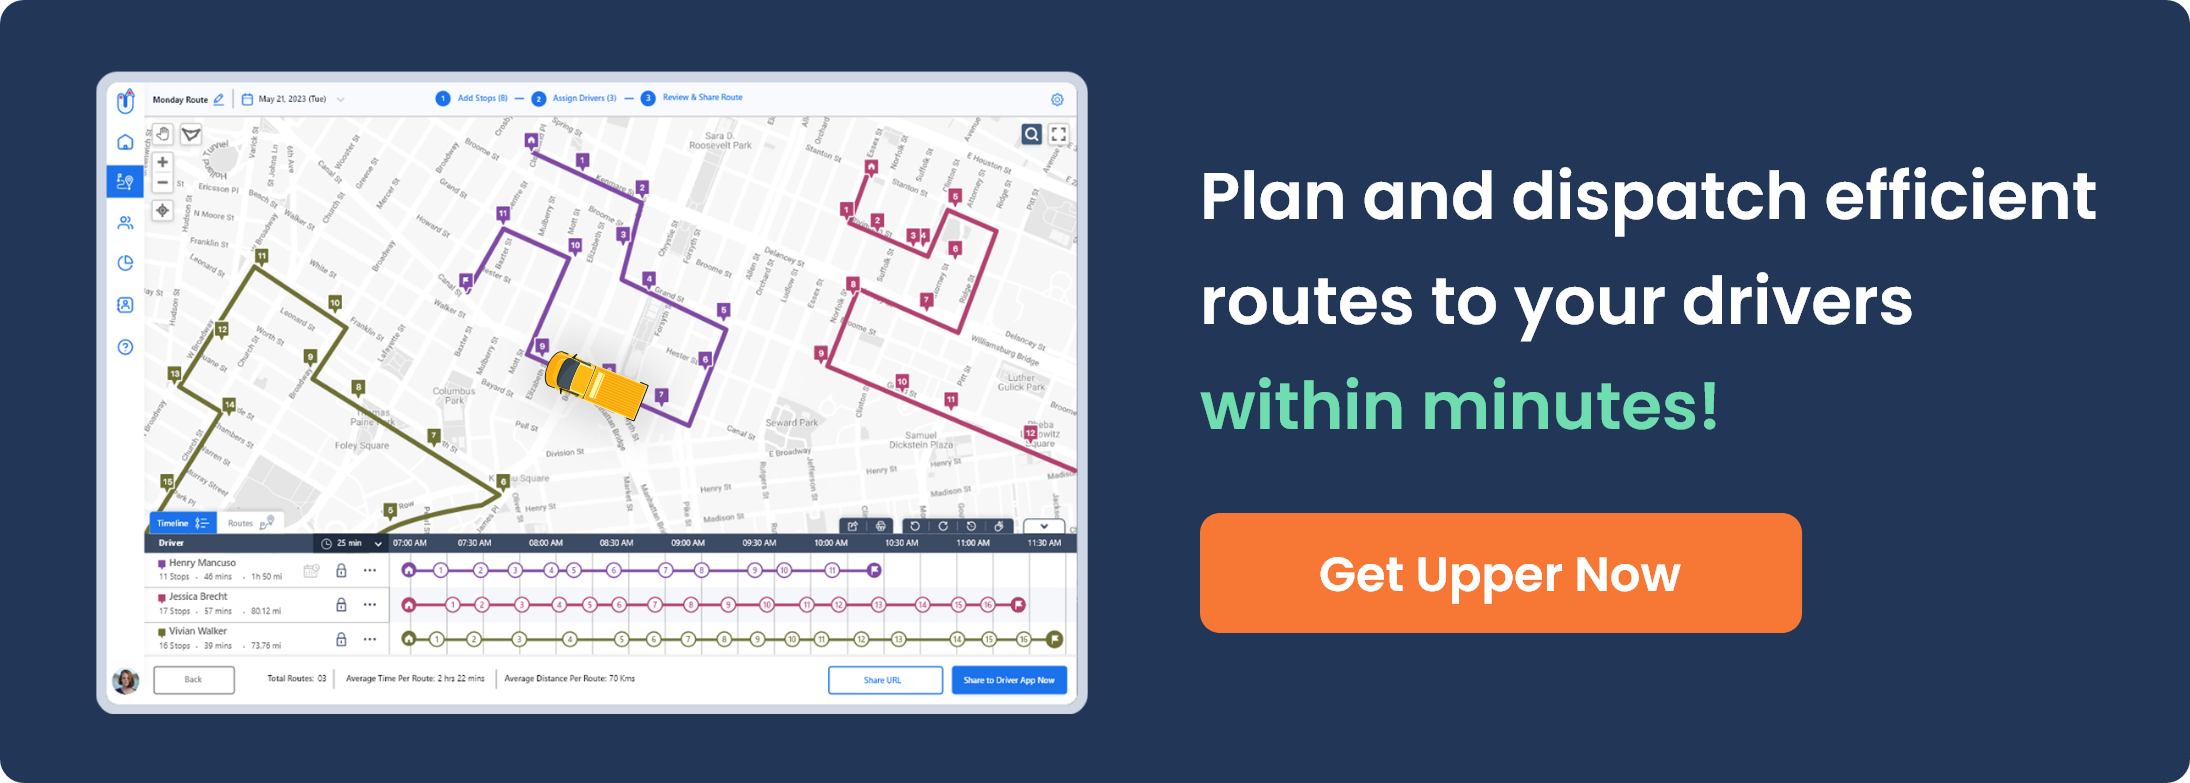 Plan dispatch routes to drivers